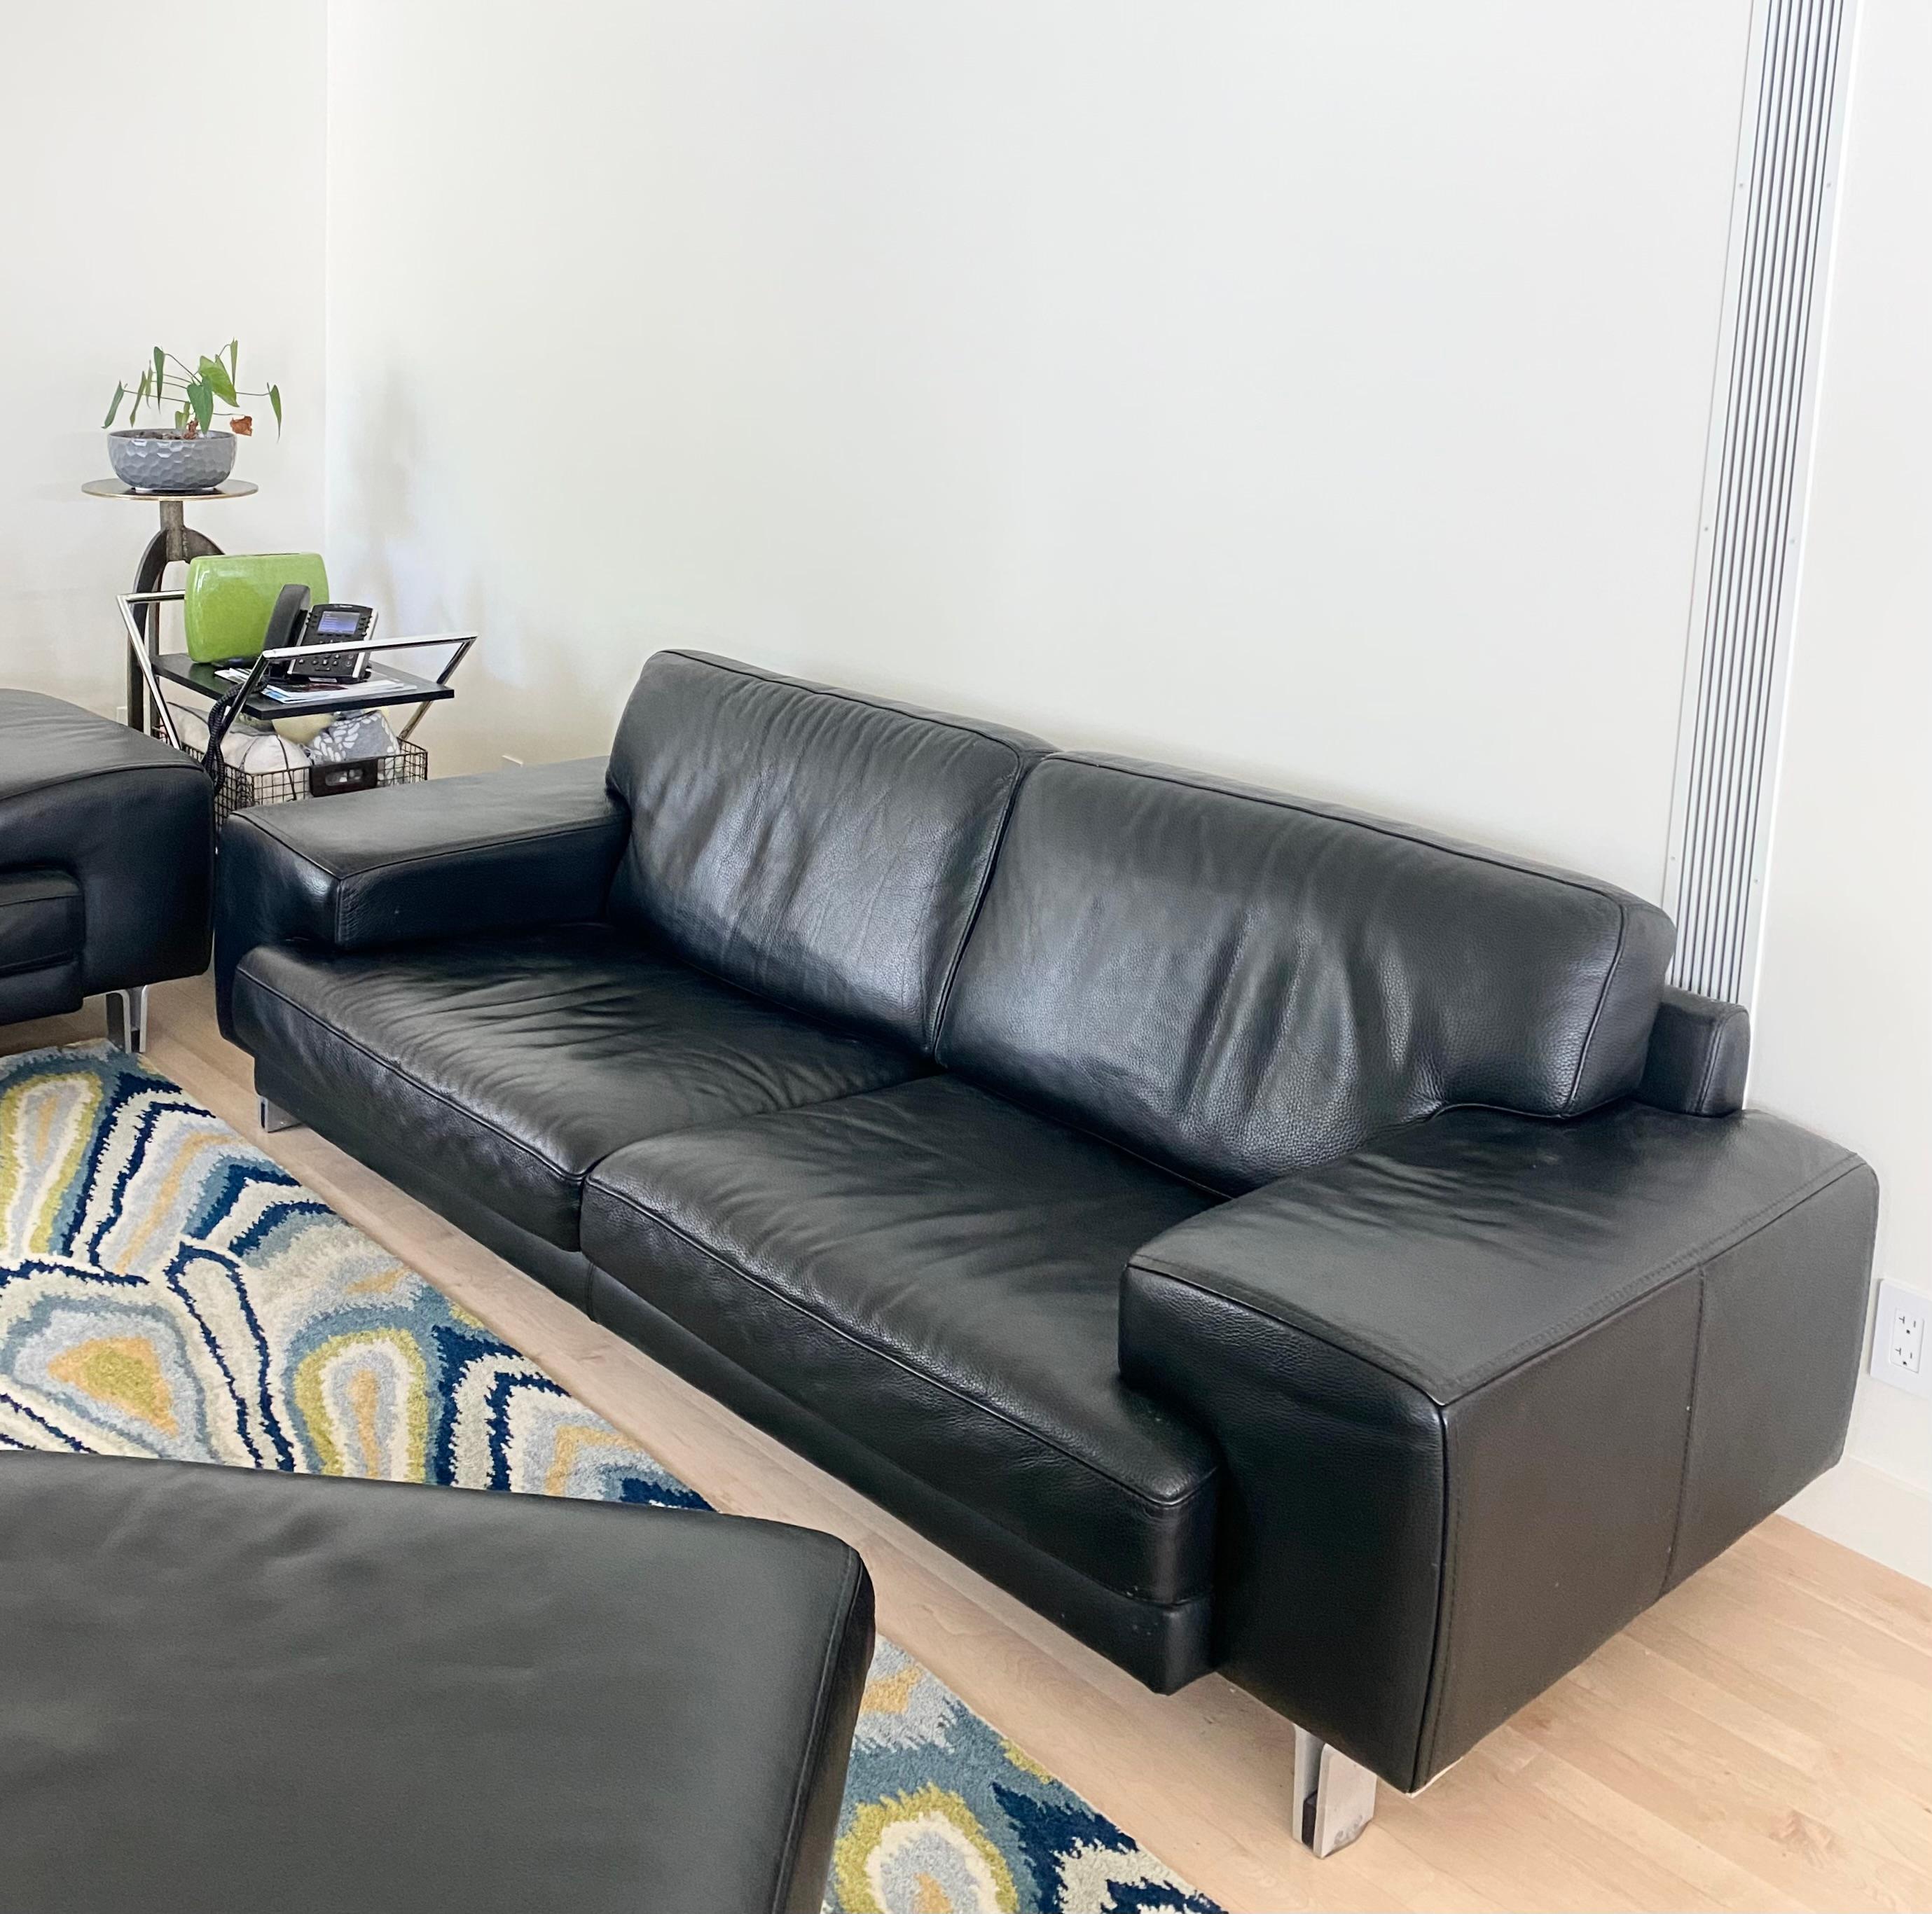 Modernist Contemporary Ligne Roset Black Pebble Leather Sofa + Love Seat In Good Condition For Sale In Fort Collins, CO